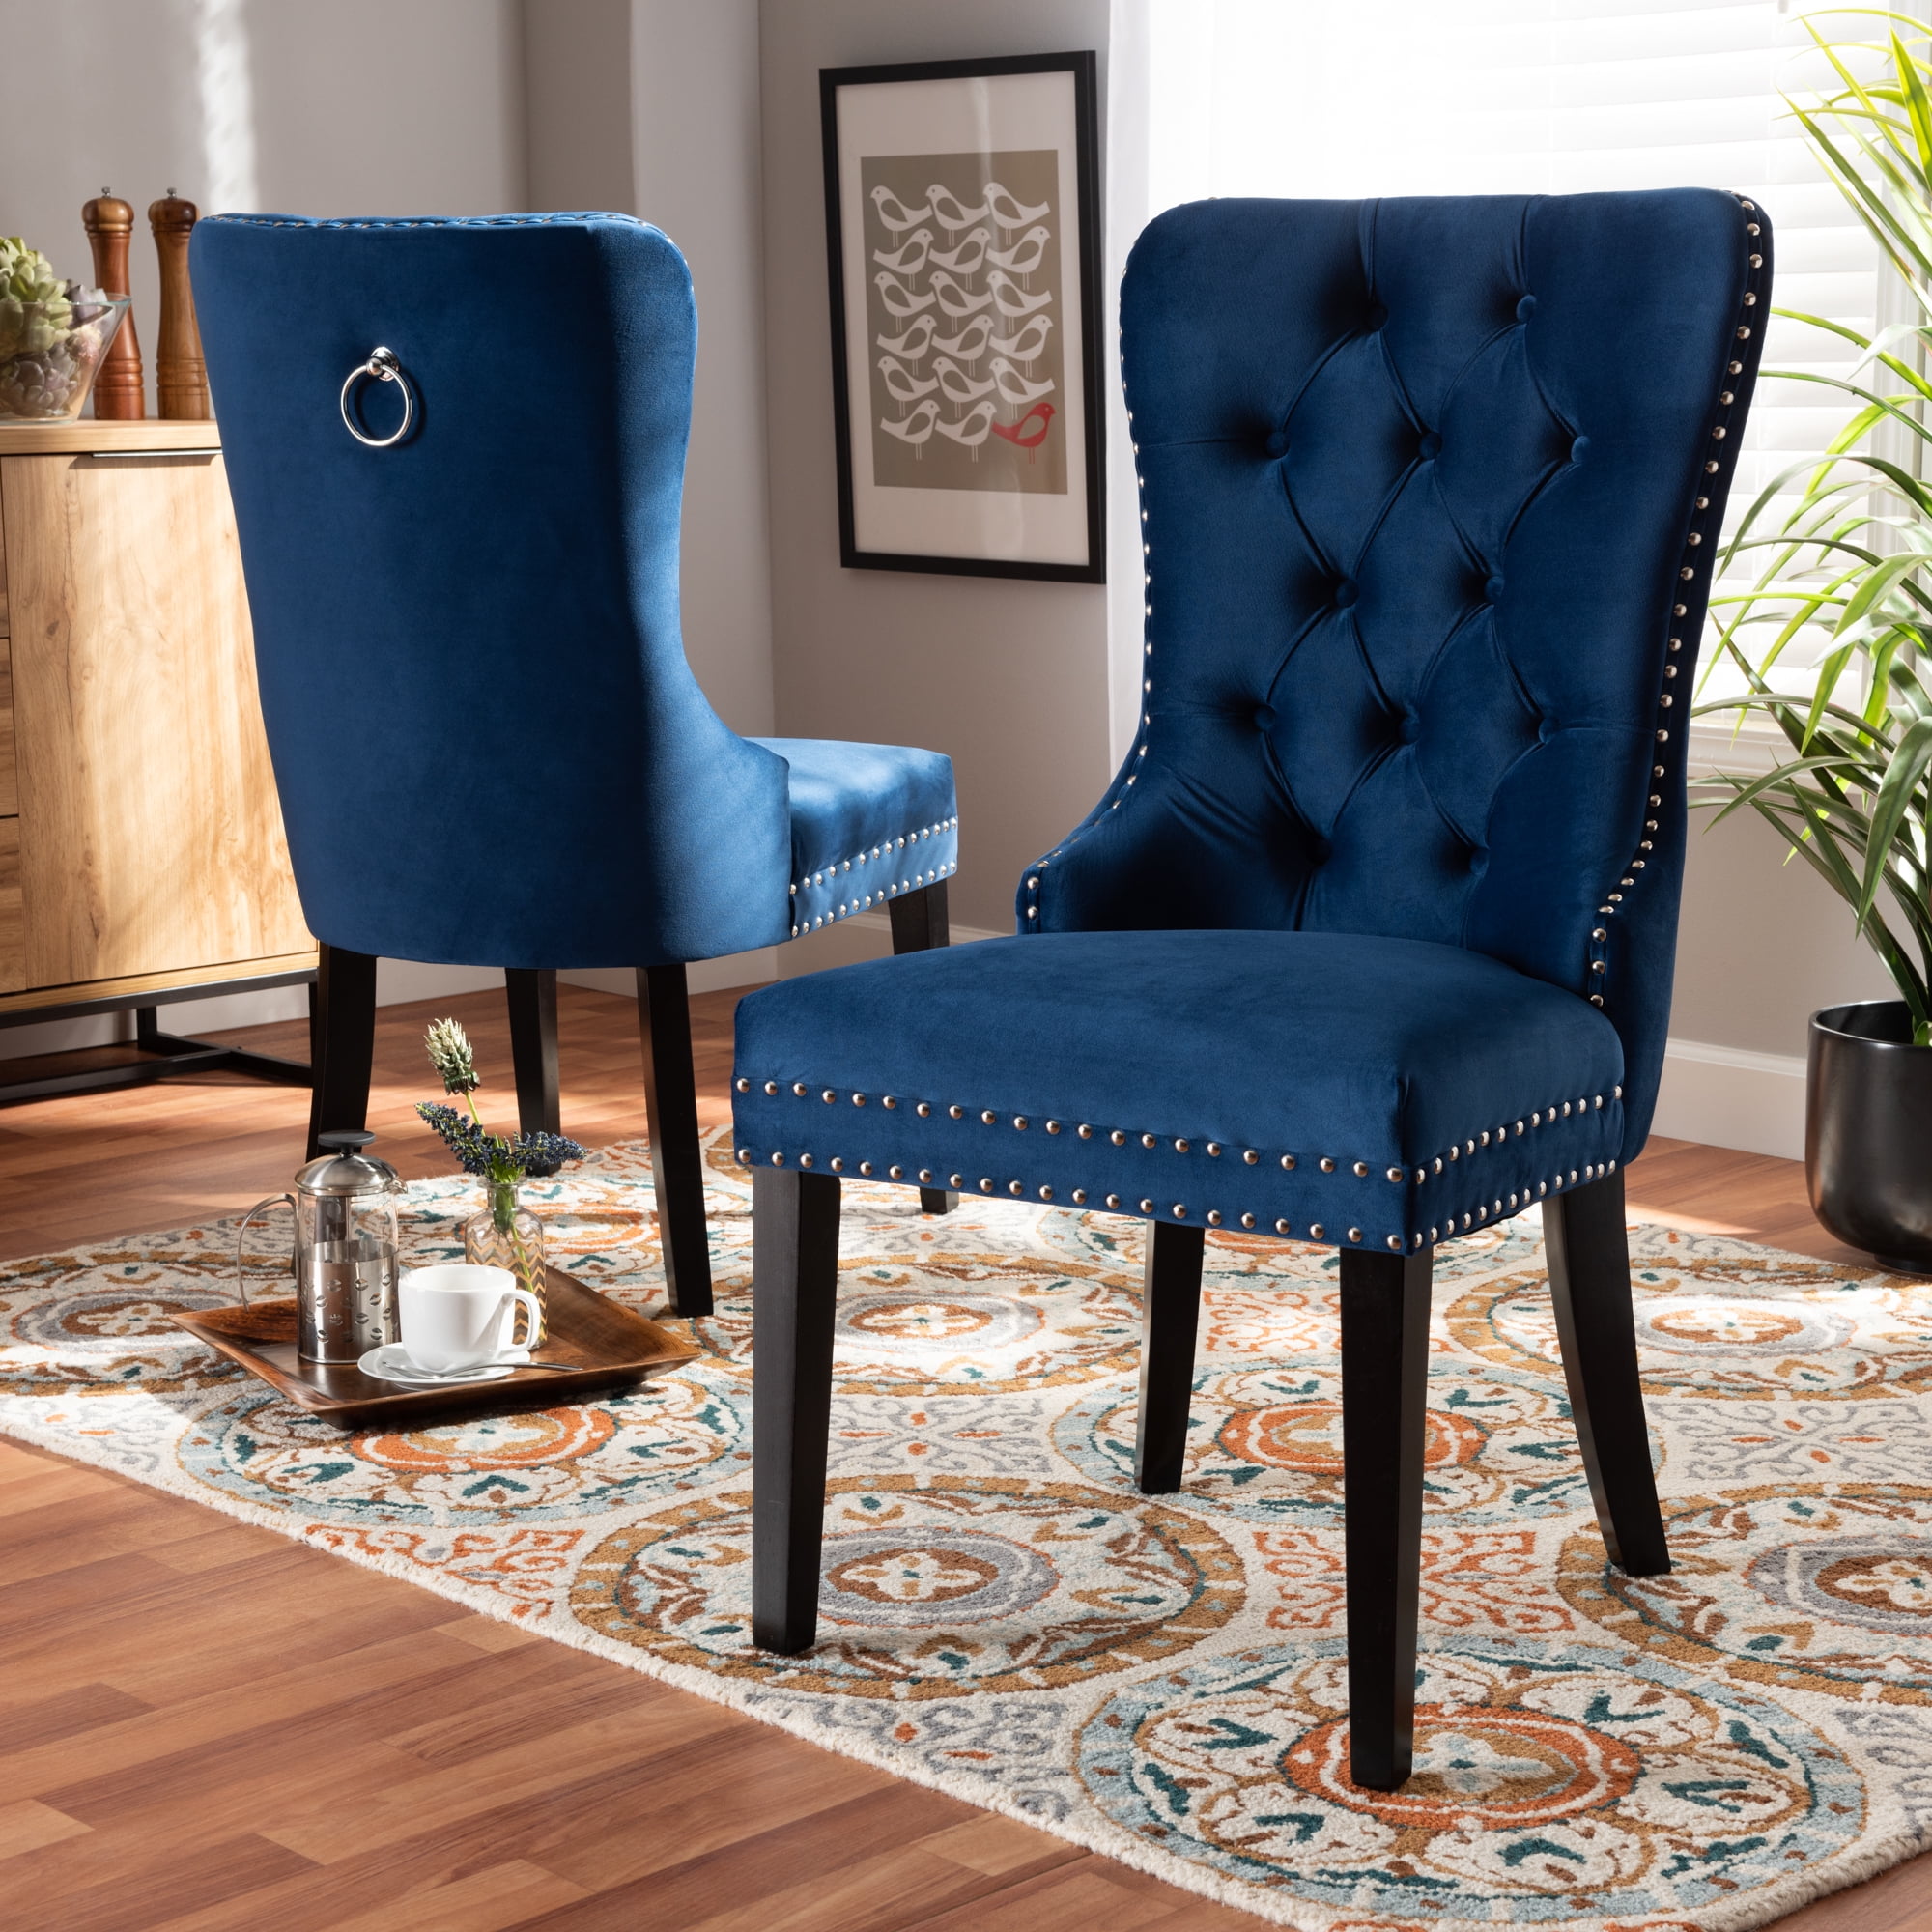 Baxton Studio Remy Modern Transitional, Navy Blue Tufted Dining Chair